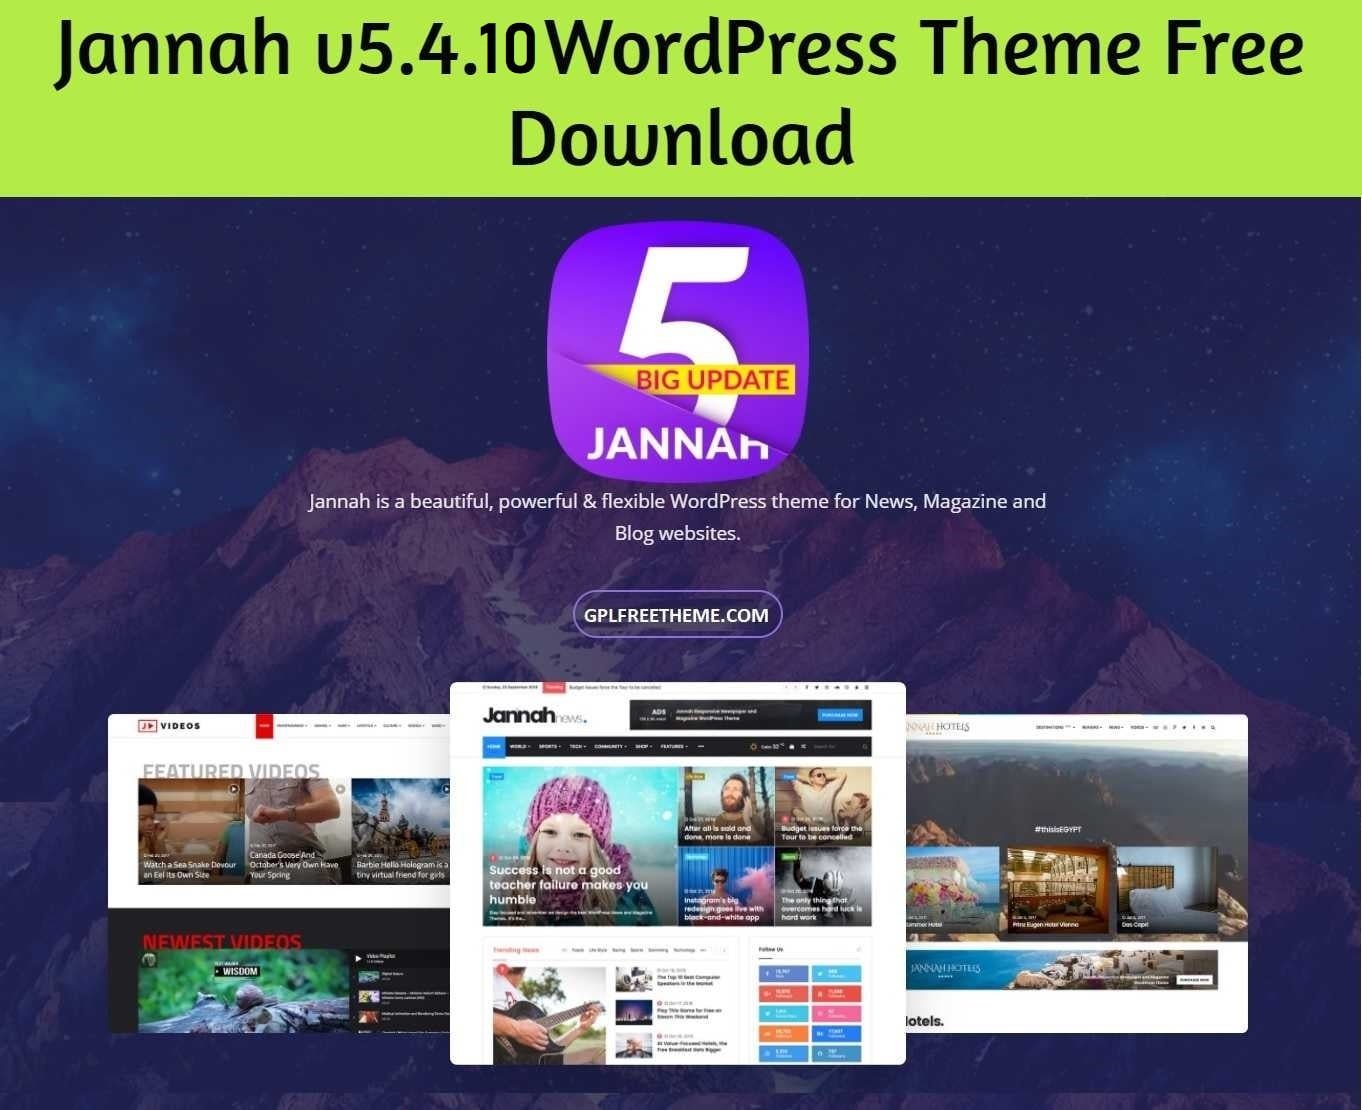 Jannah v5.4.10 WordPress Theme Free Download [Activated]